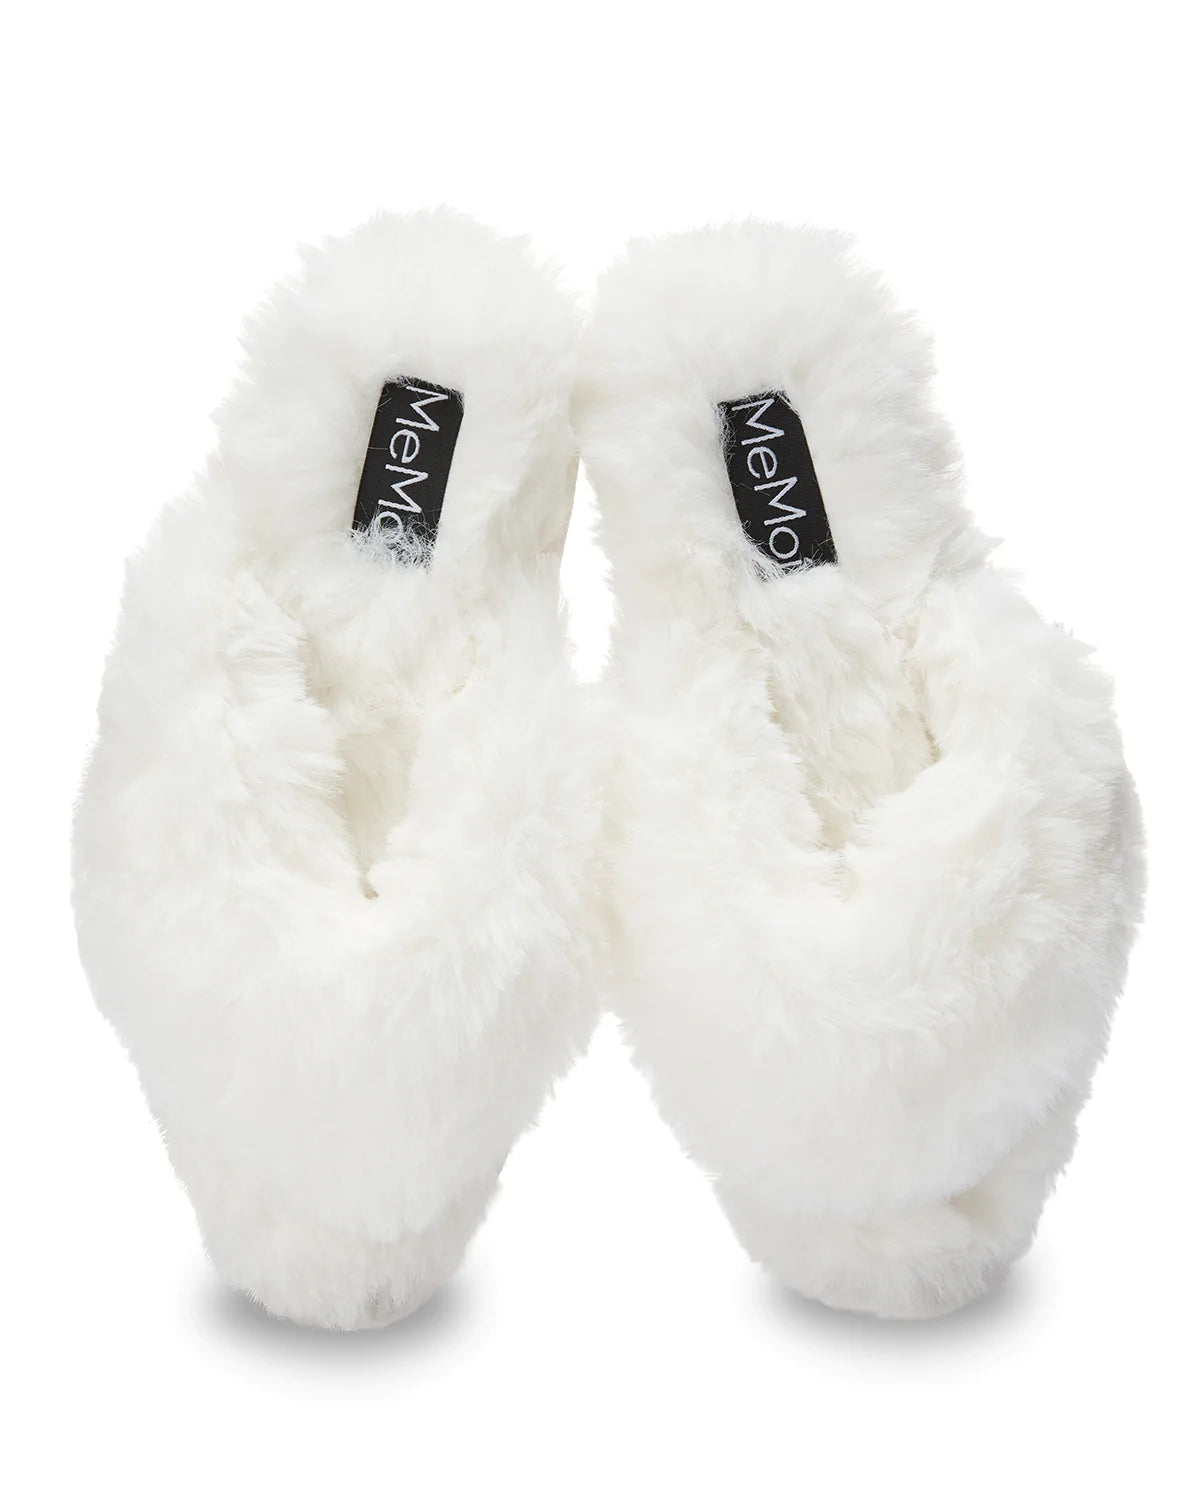 Fur slippers Archives - MIPJ STORE